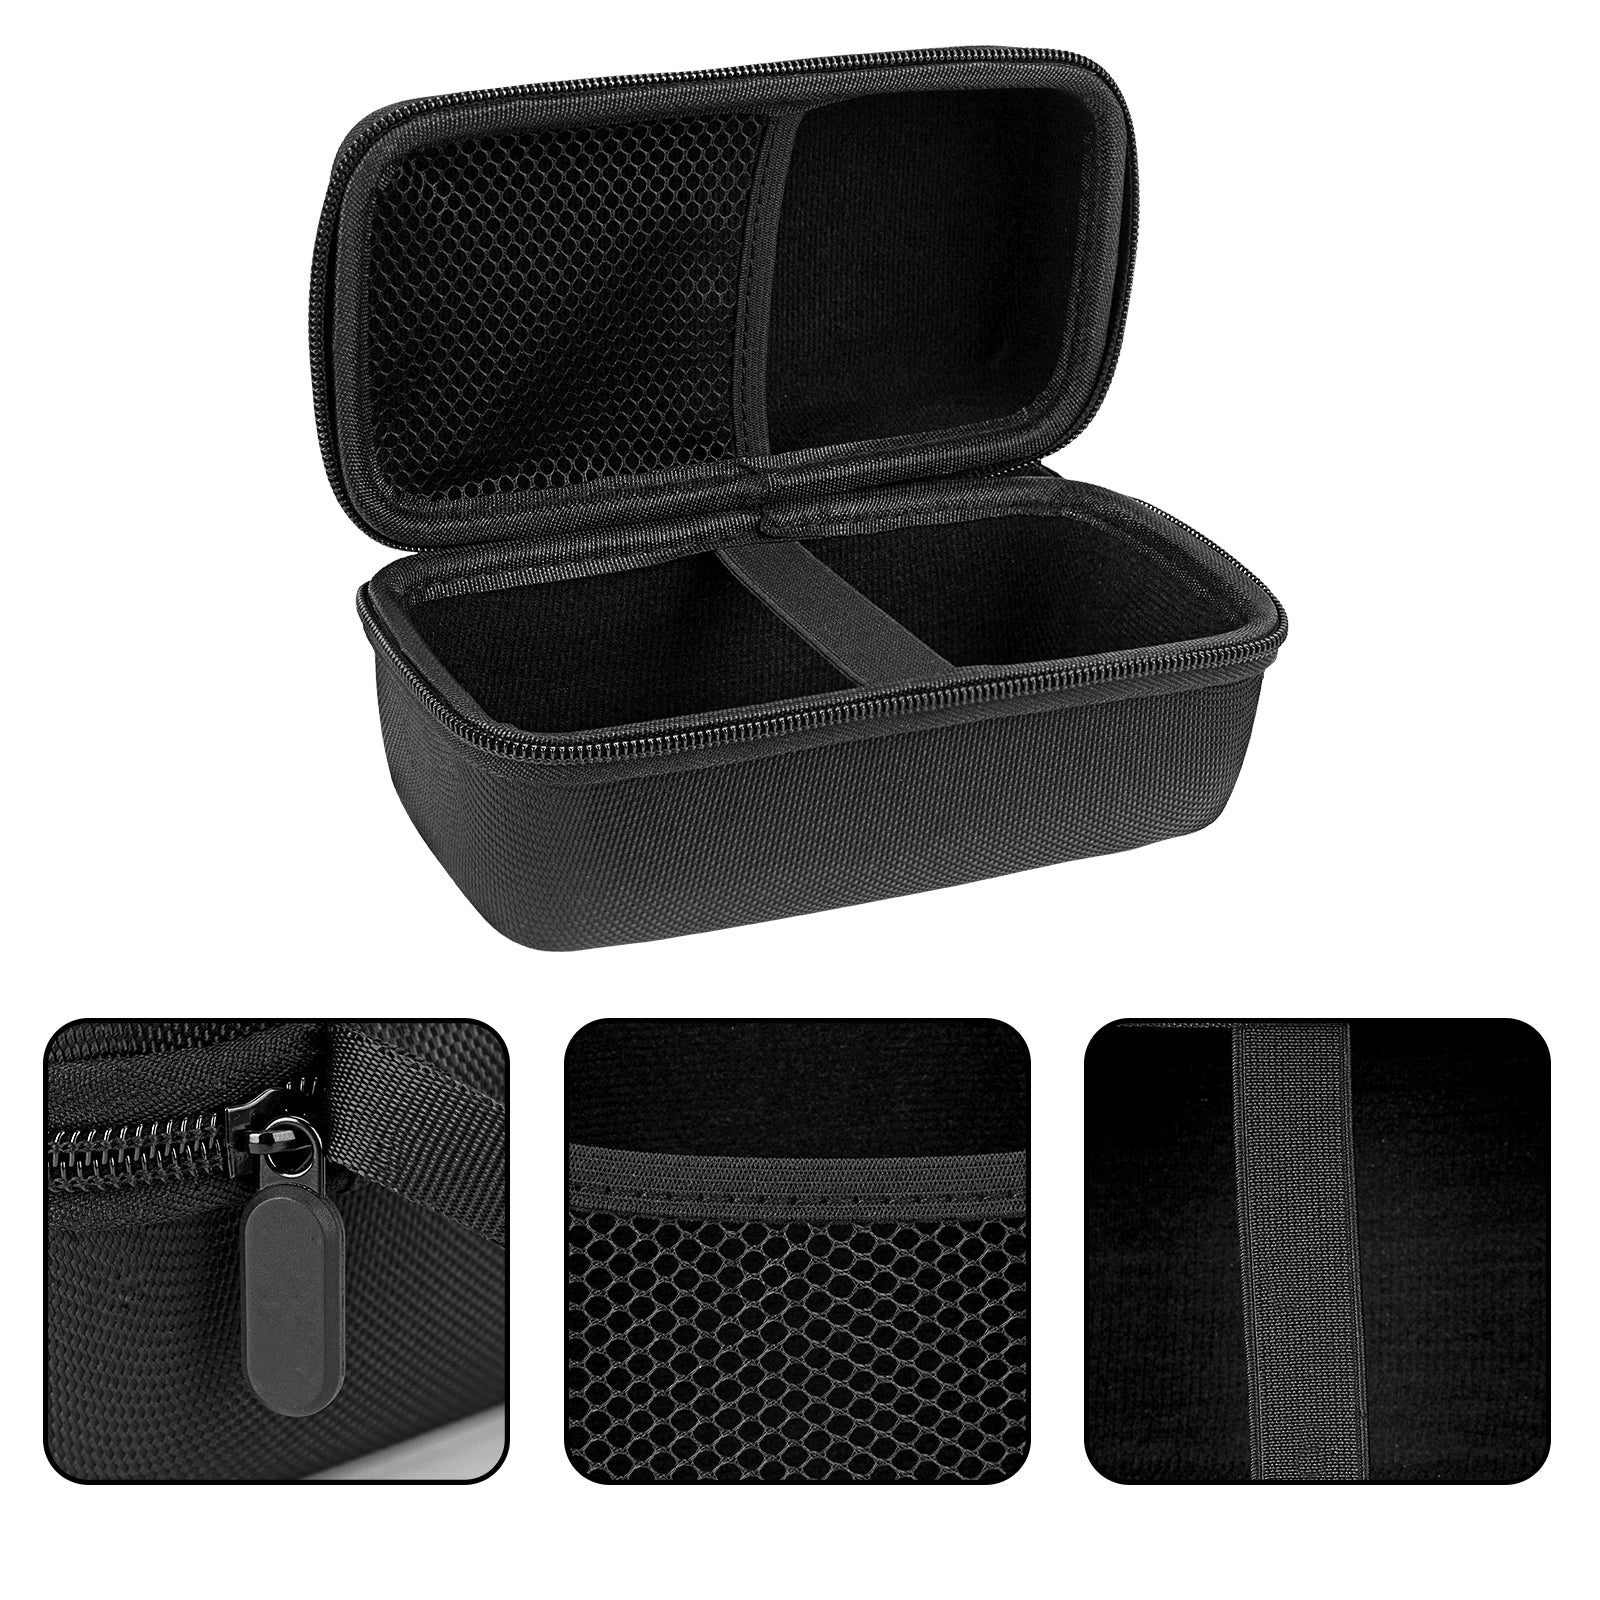 M.G.R.J® Portable Carrying Case Cover for Marshall Emberton